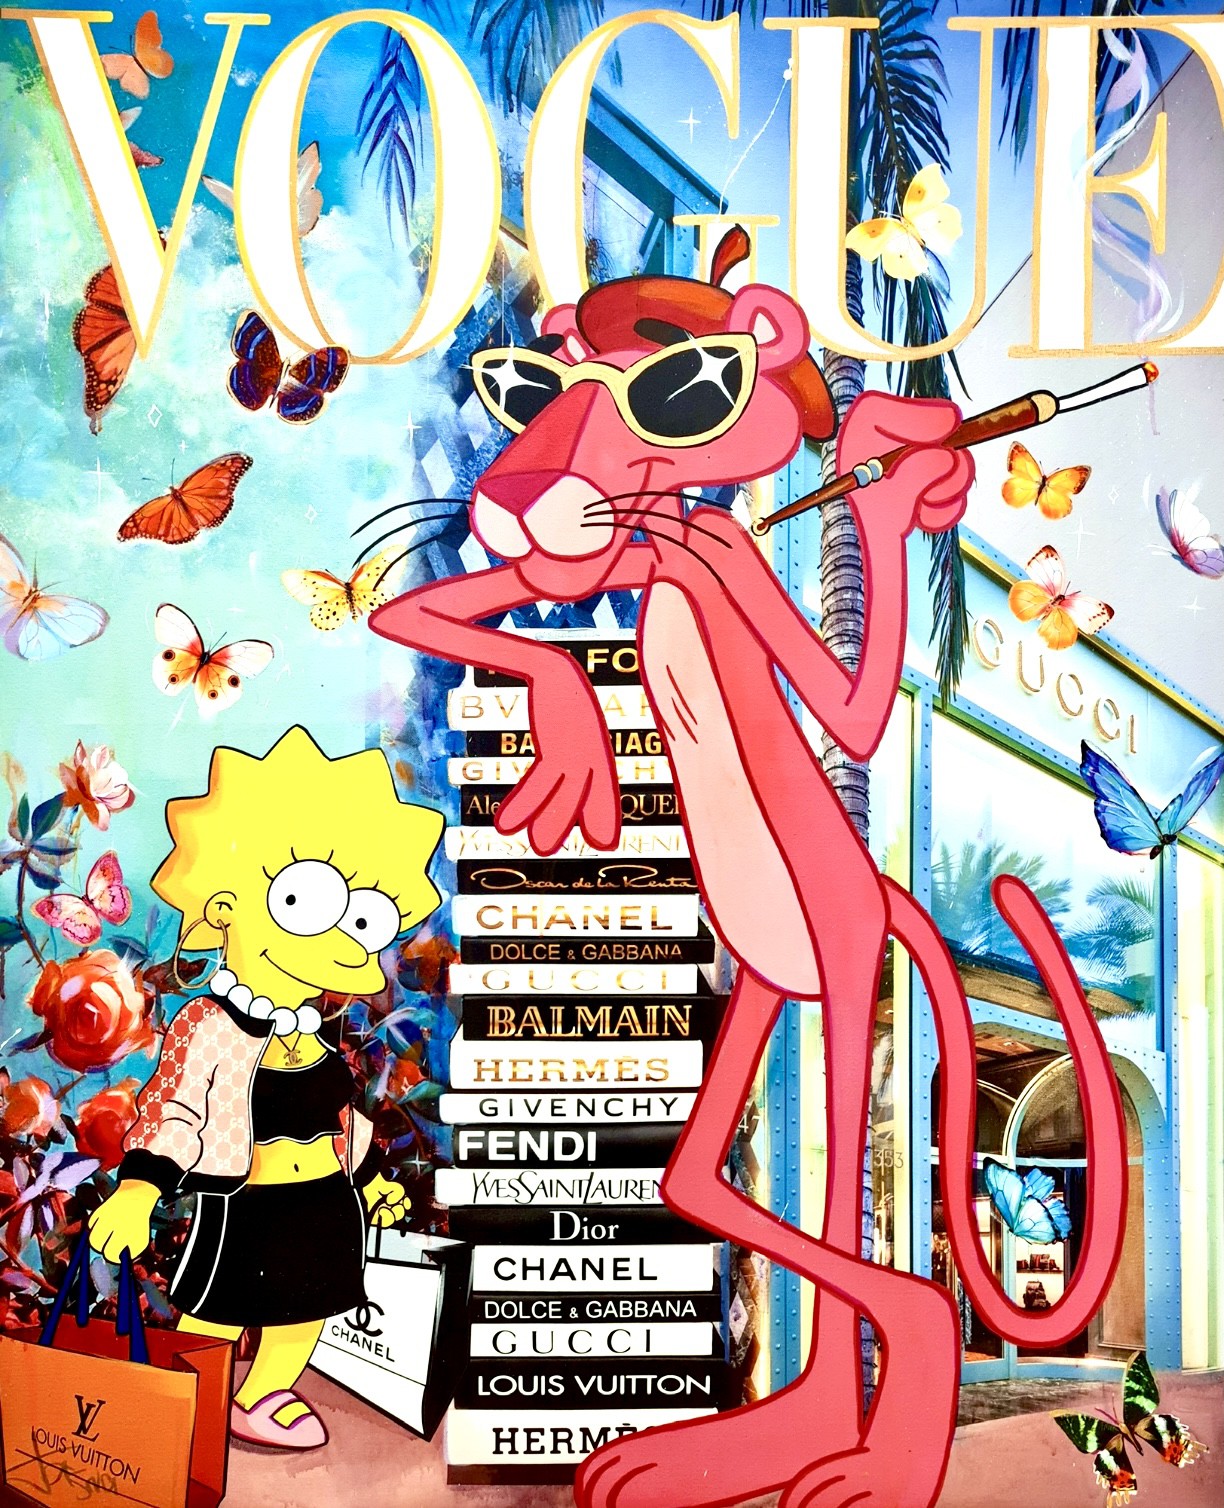 ▷ Pink Panther Wears Gucci by Yasna Godovanik, 2021 | Painting